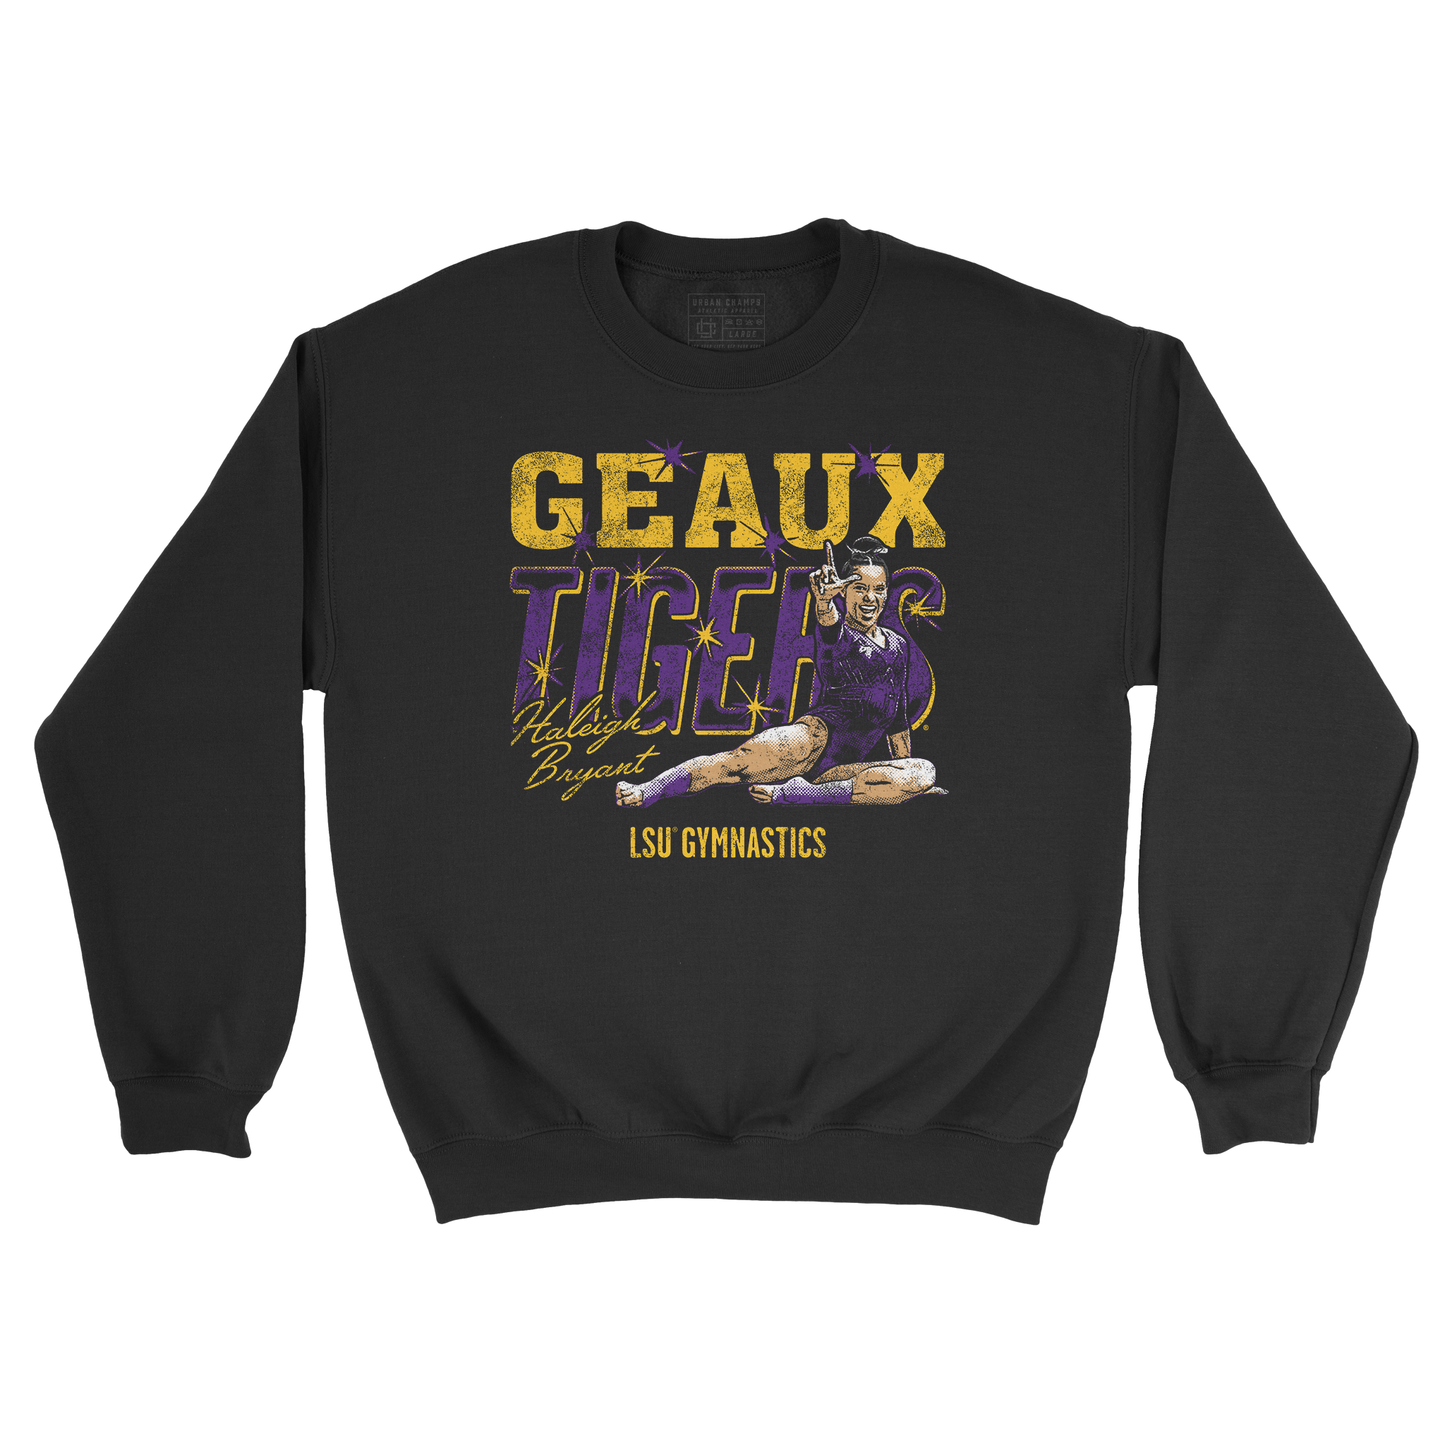 EXCLUSIVE RELEASE: Haleigh Bryant - Geaux Tigers Black Crew